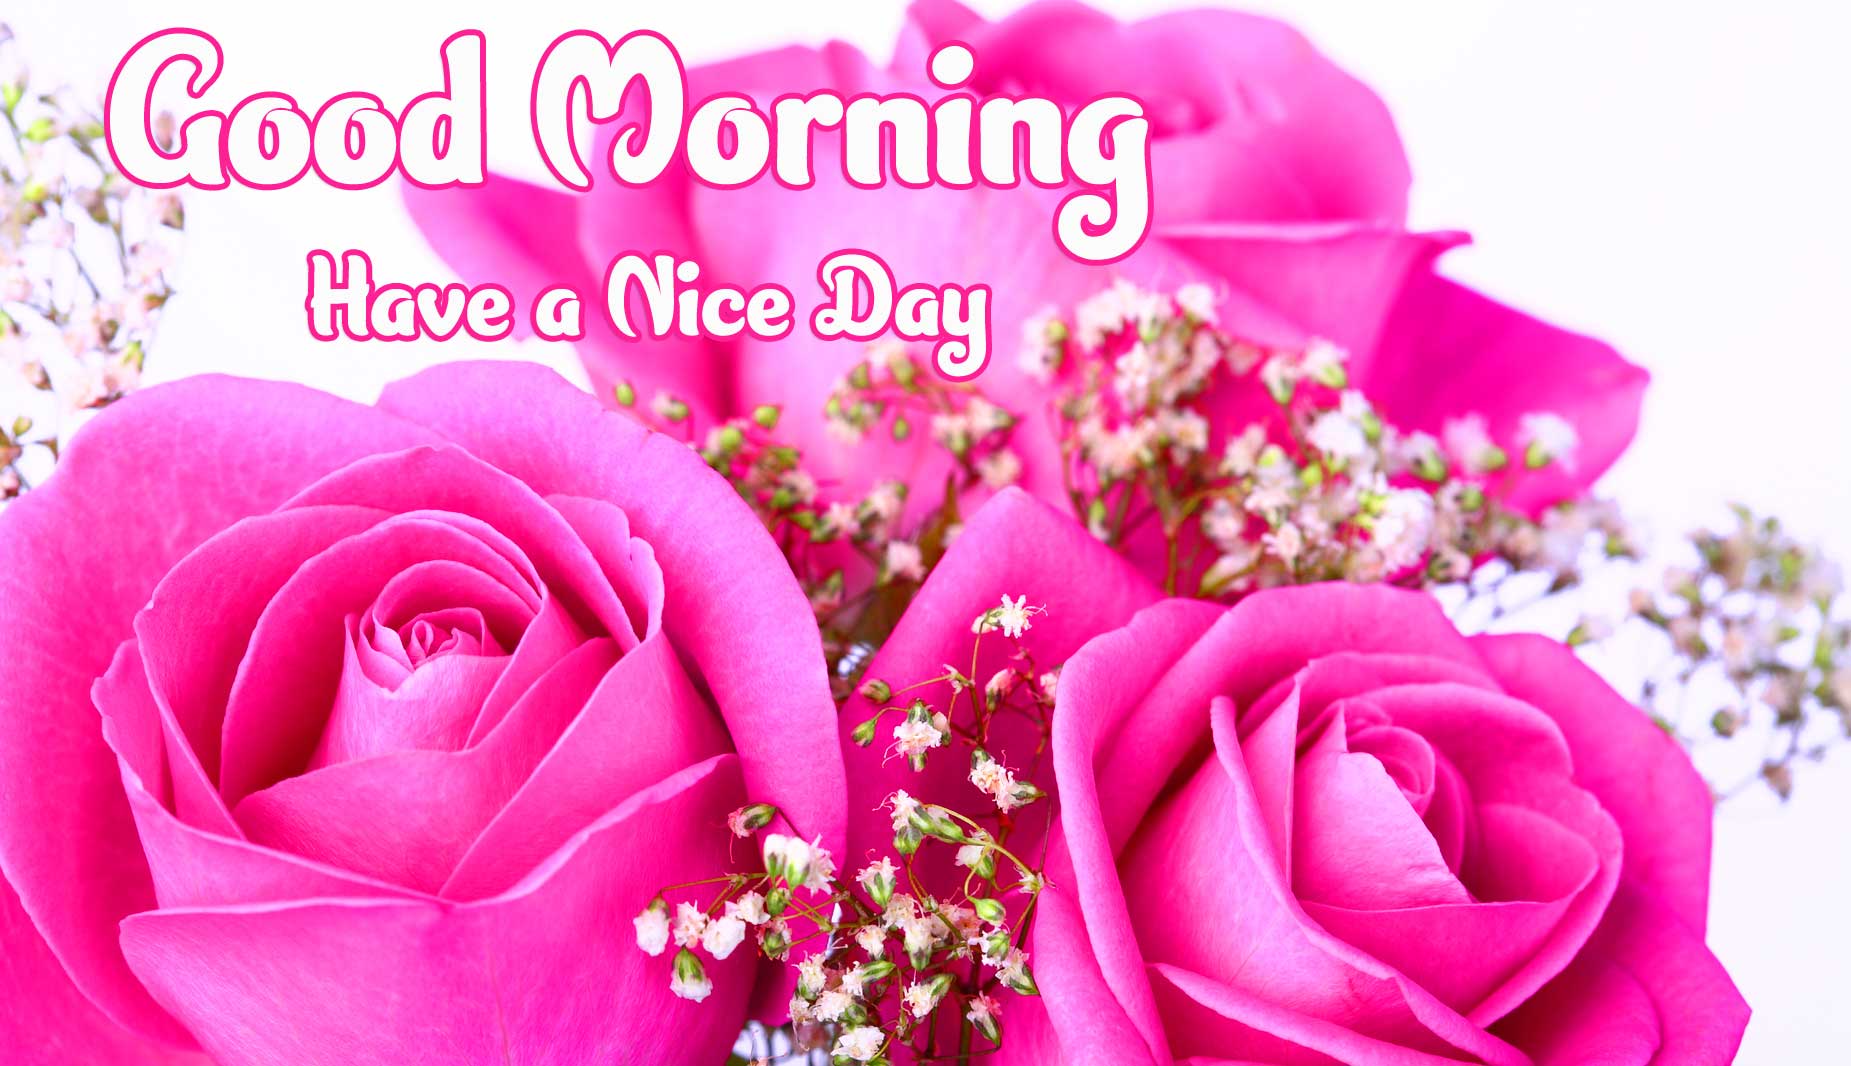 Beautiful Good Morning Wishes Images Wallpaper Pics Download 